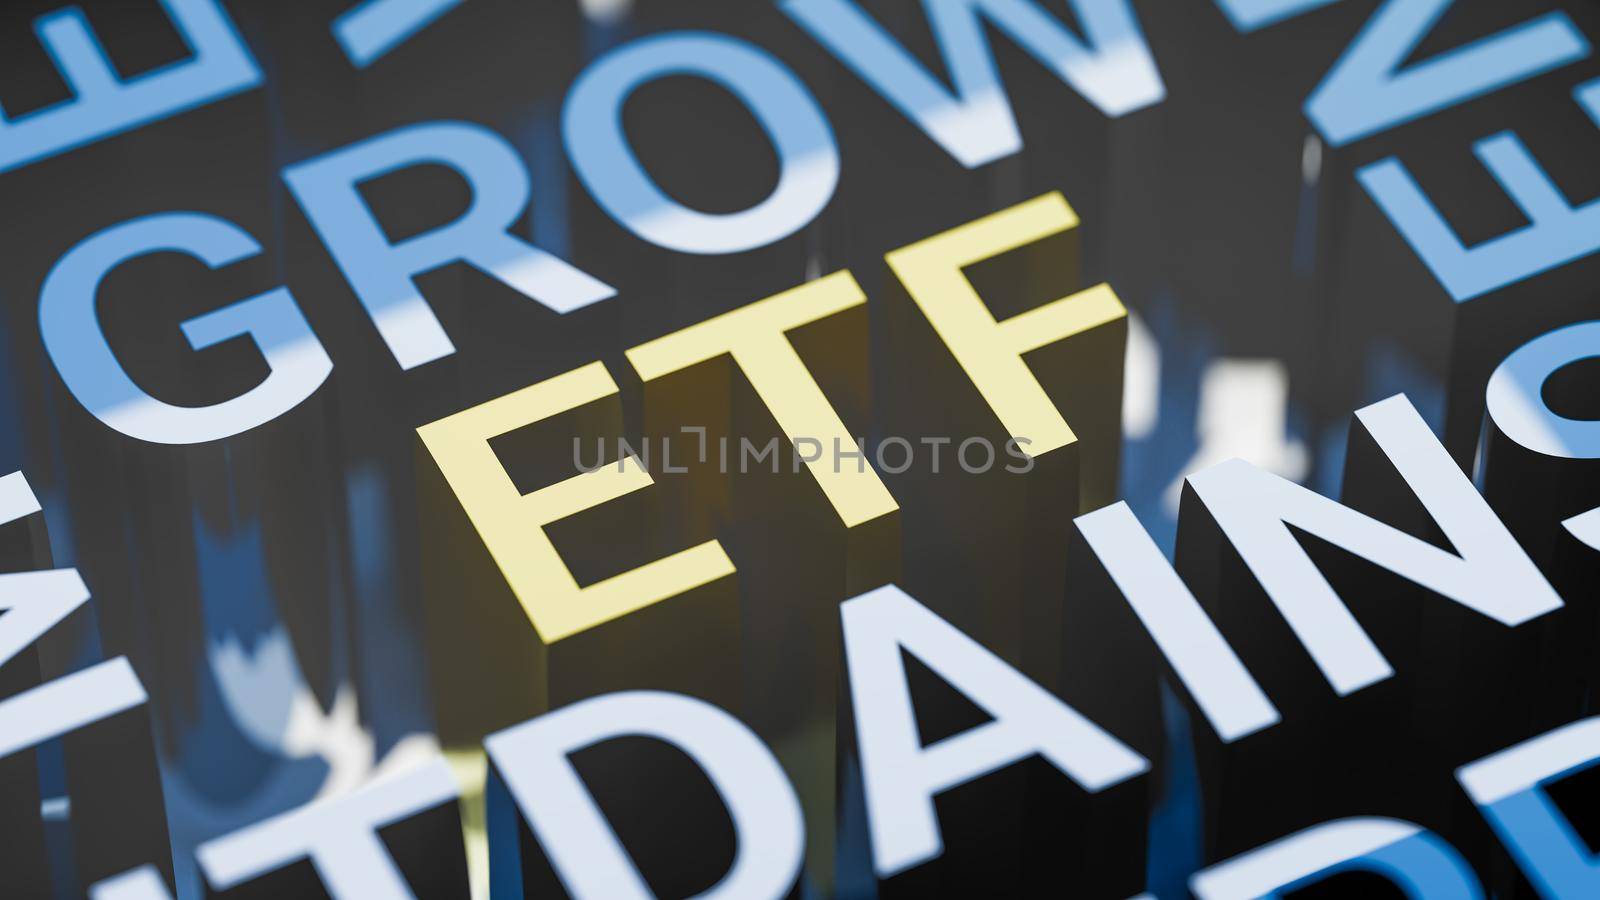 Concept image of business tag ETF. Three-dimensional letters geometrically on a white background. EBITDA, TRUST, INVESTMENT, TAX, REIT, VALUATION, EARNINGS, INSURANCE, REAL ESTATE. 3d rendering by kwarkot